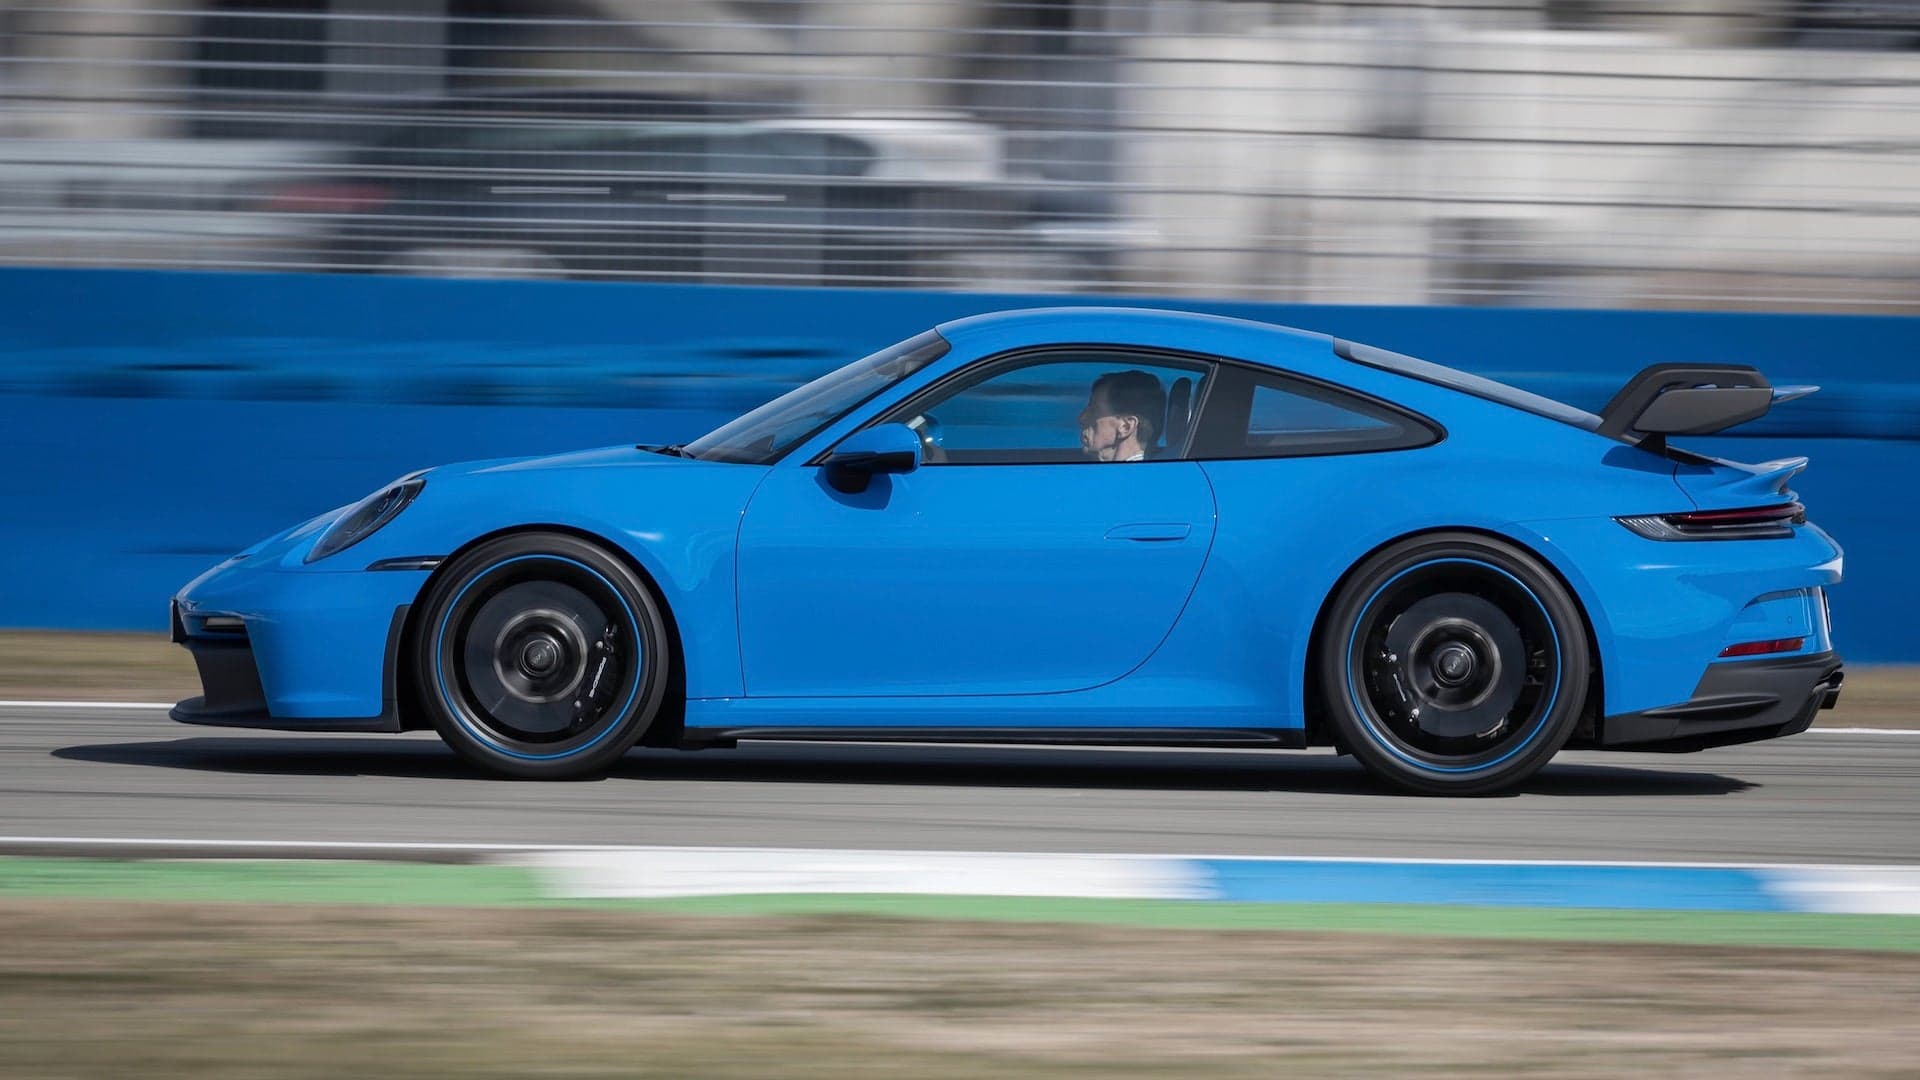 Porsche Ran the New 911 GT3 at 186 MPH for 3,100 Continuous Miles, Only Stopping to Refuel